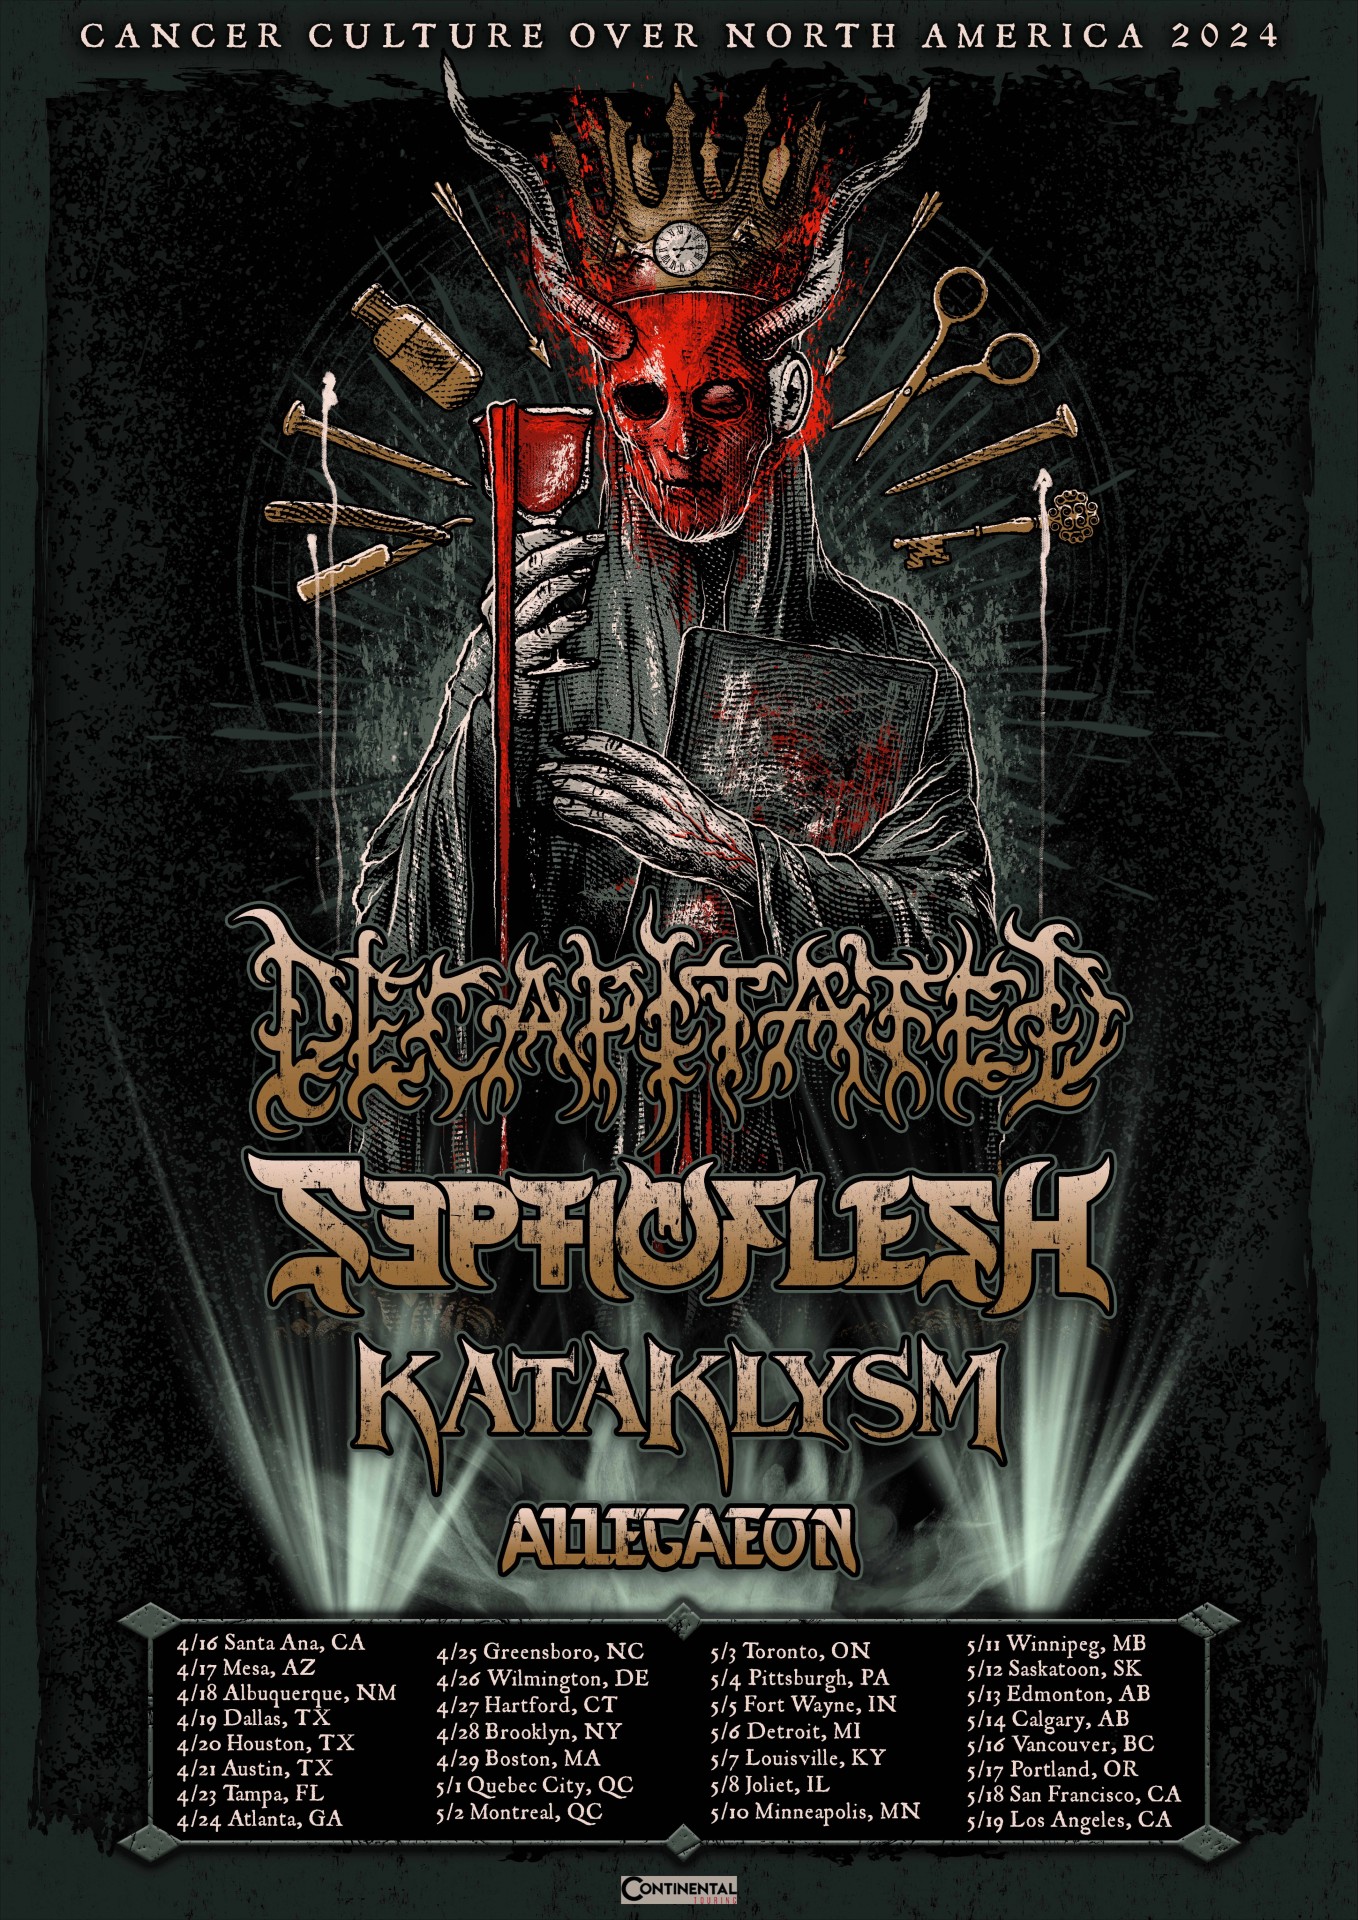 Decapitated “Cancer Culture Over North America 2024” tour poster